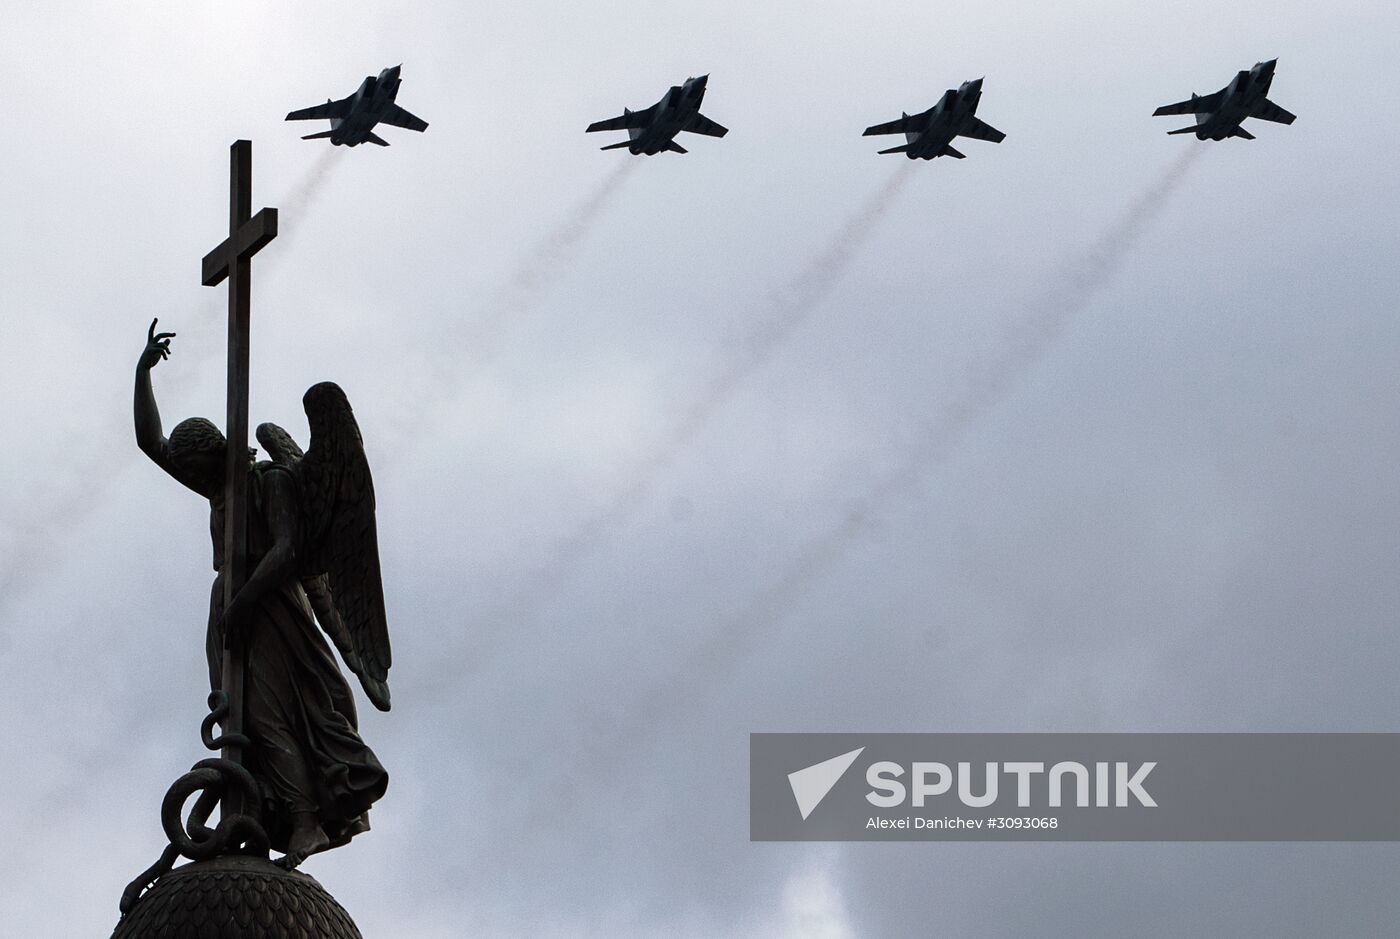 Run-through of Victory Day parade in St. Petersburg